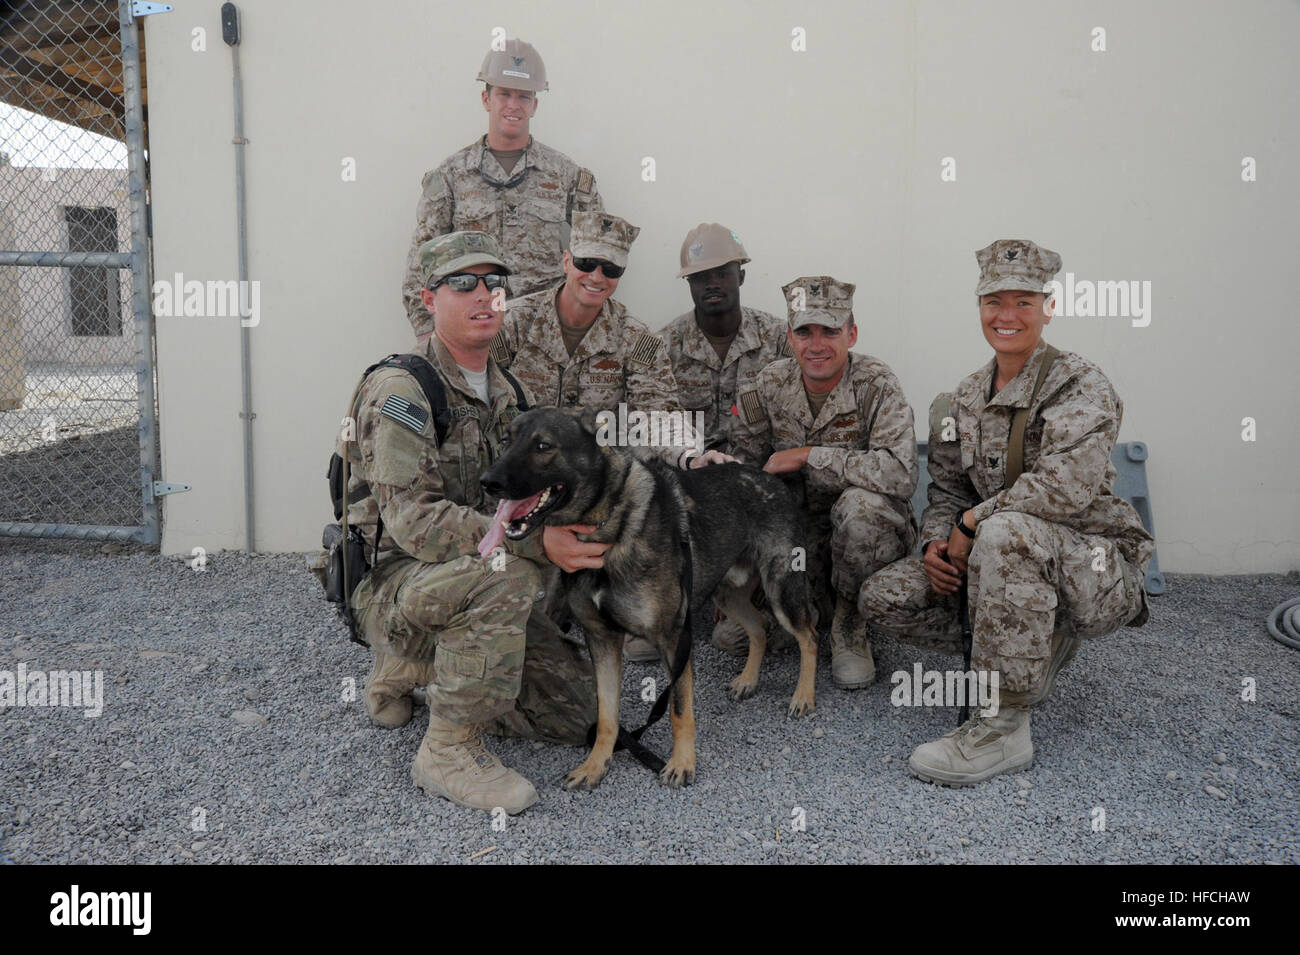 Seabees attached to Naval Mobile Construction Battalion (NMCB) 28 pose for a photo with Master-at-Arms 2nd Class Douglas Fisher, Military Working Dog (MWD) Master-at-Arms 1st Class Buksi (front row from left) Oct. 11, 2013. Seabees, from left are: Builder 1st Class Mark Campbell, Steelworker 1st Class Michael Boucher, Builder 3rd Class Peter Appiah, Builder 2nd Class Danny Gingerich and Builder 3rd Class Christine Fletcher. NMCB 28 is based out of Barksdale Air Force Base, Shreveport, La., and is currently deployed to Afghanistan in support of Operation Enduring Freedom. (U.S. Navy photo by Ma Stock Photo